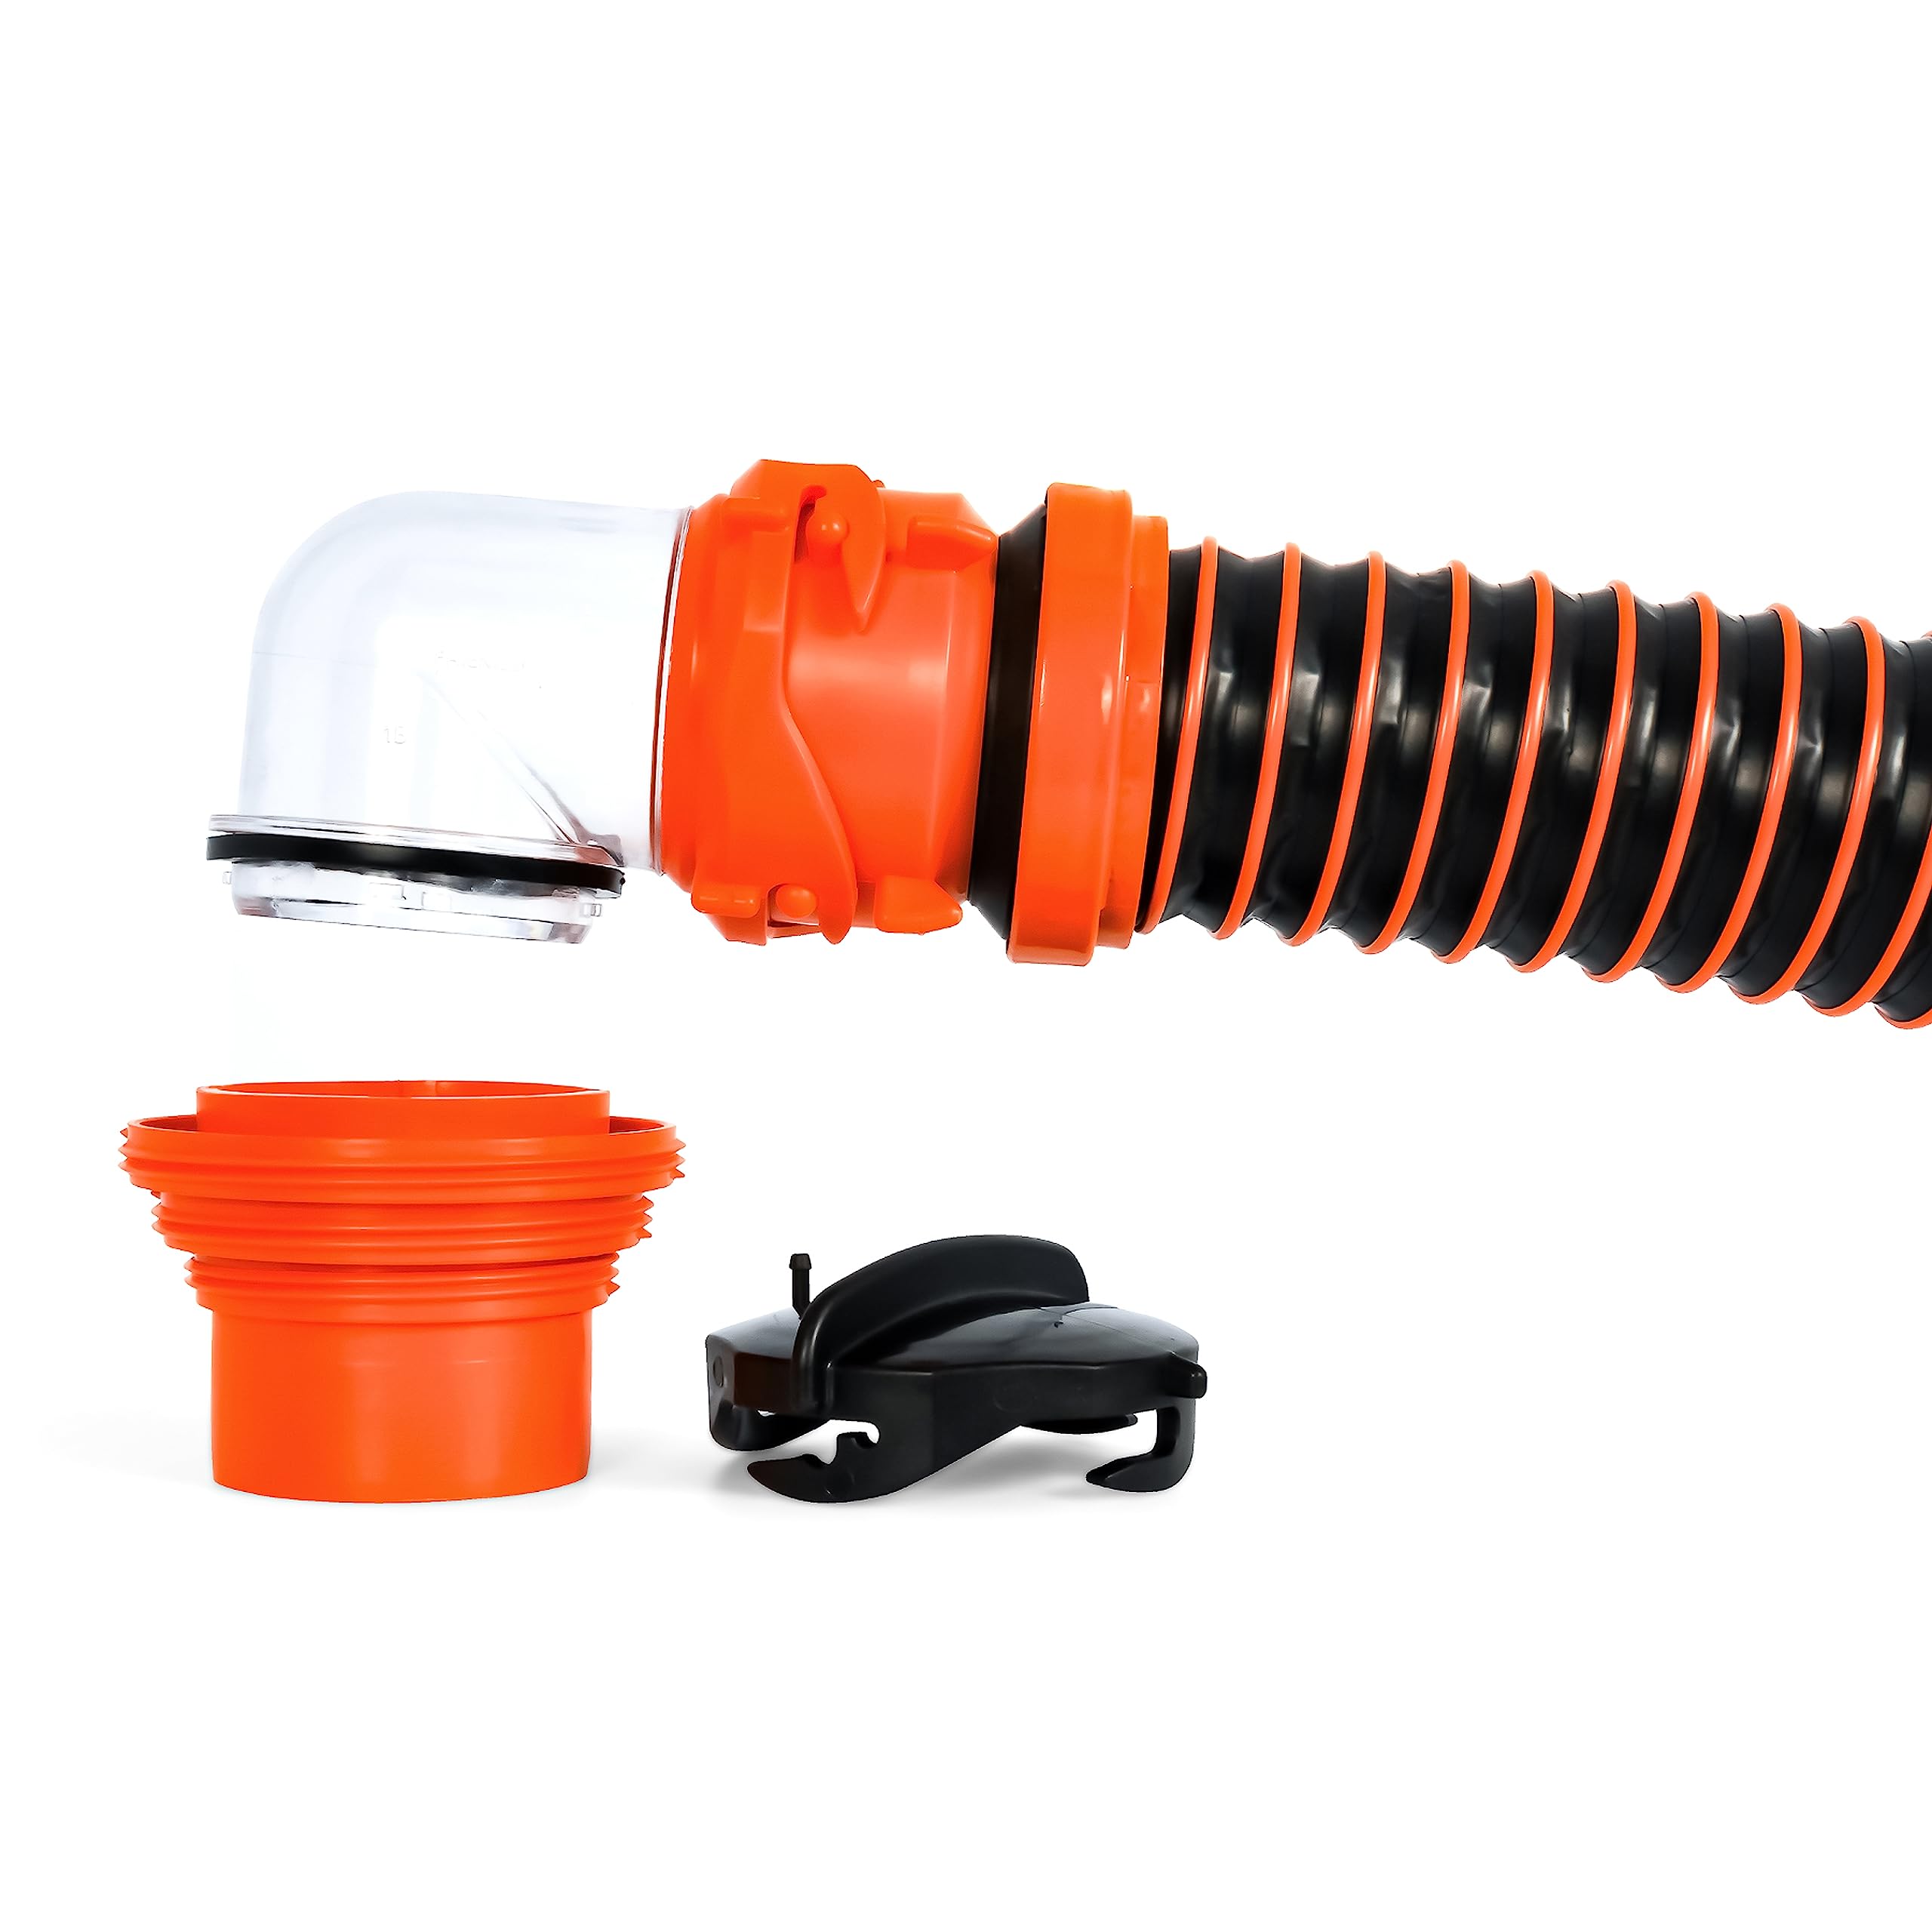 Camco RhinoEXTREME 20-Foot Camper/RV Sewer Hose Kit | Features TPE Technology for Abrasion Resistance and Crush Protection | Includes Pre-Attached Rhino Swivel Fittings (21012)